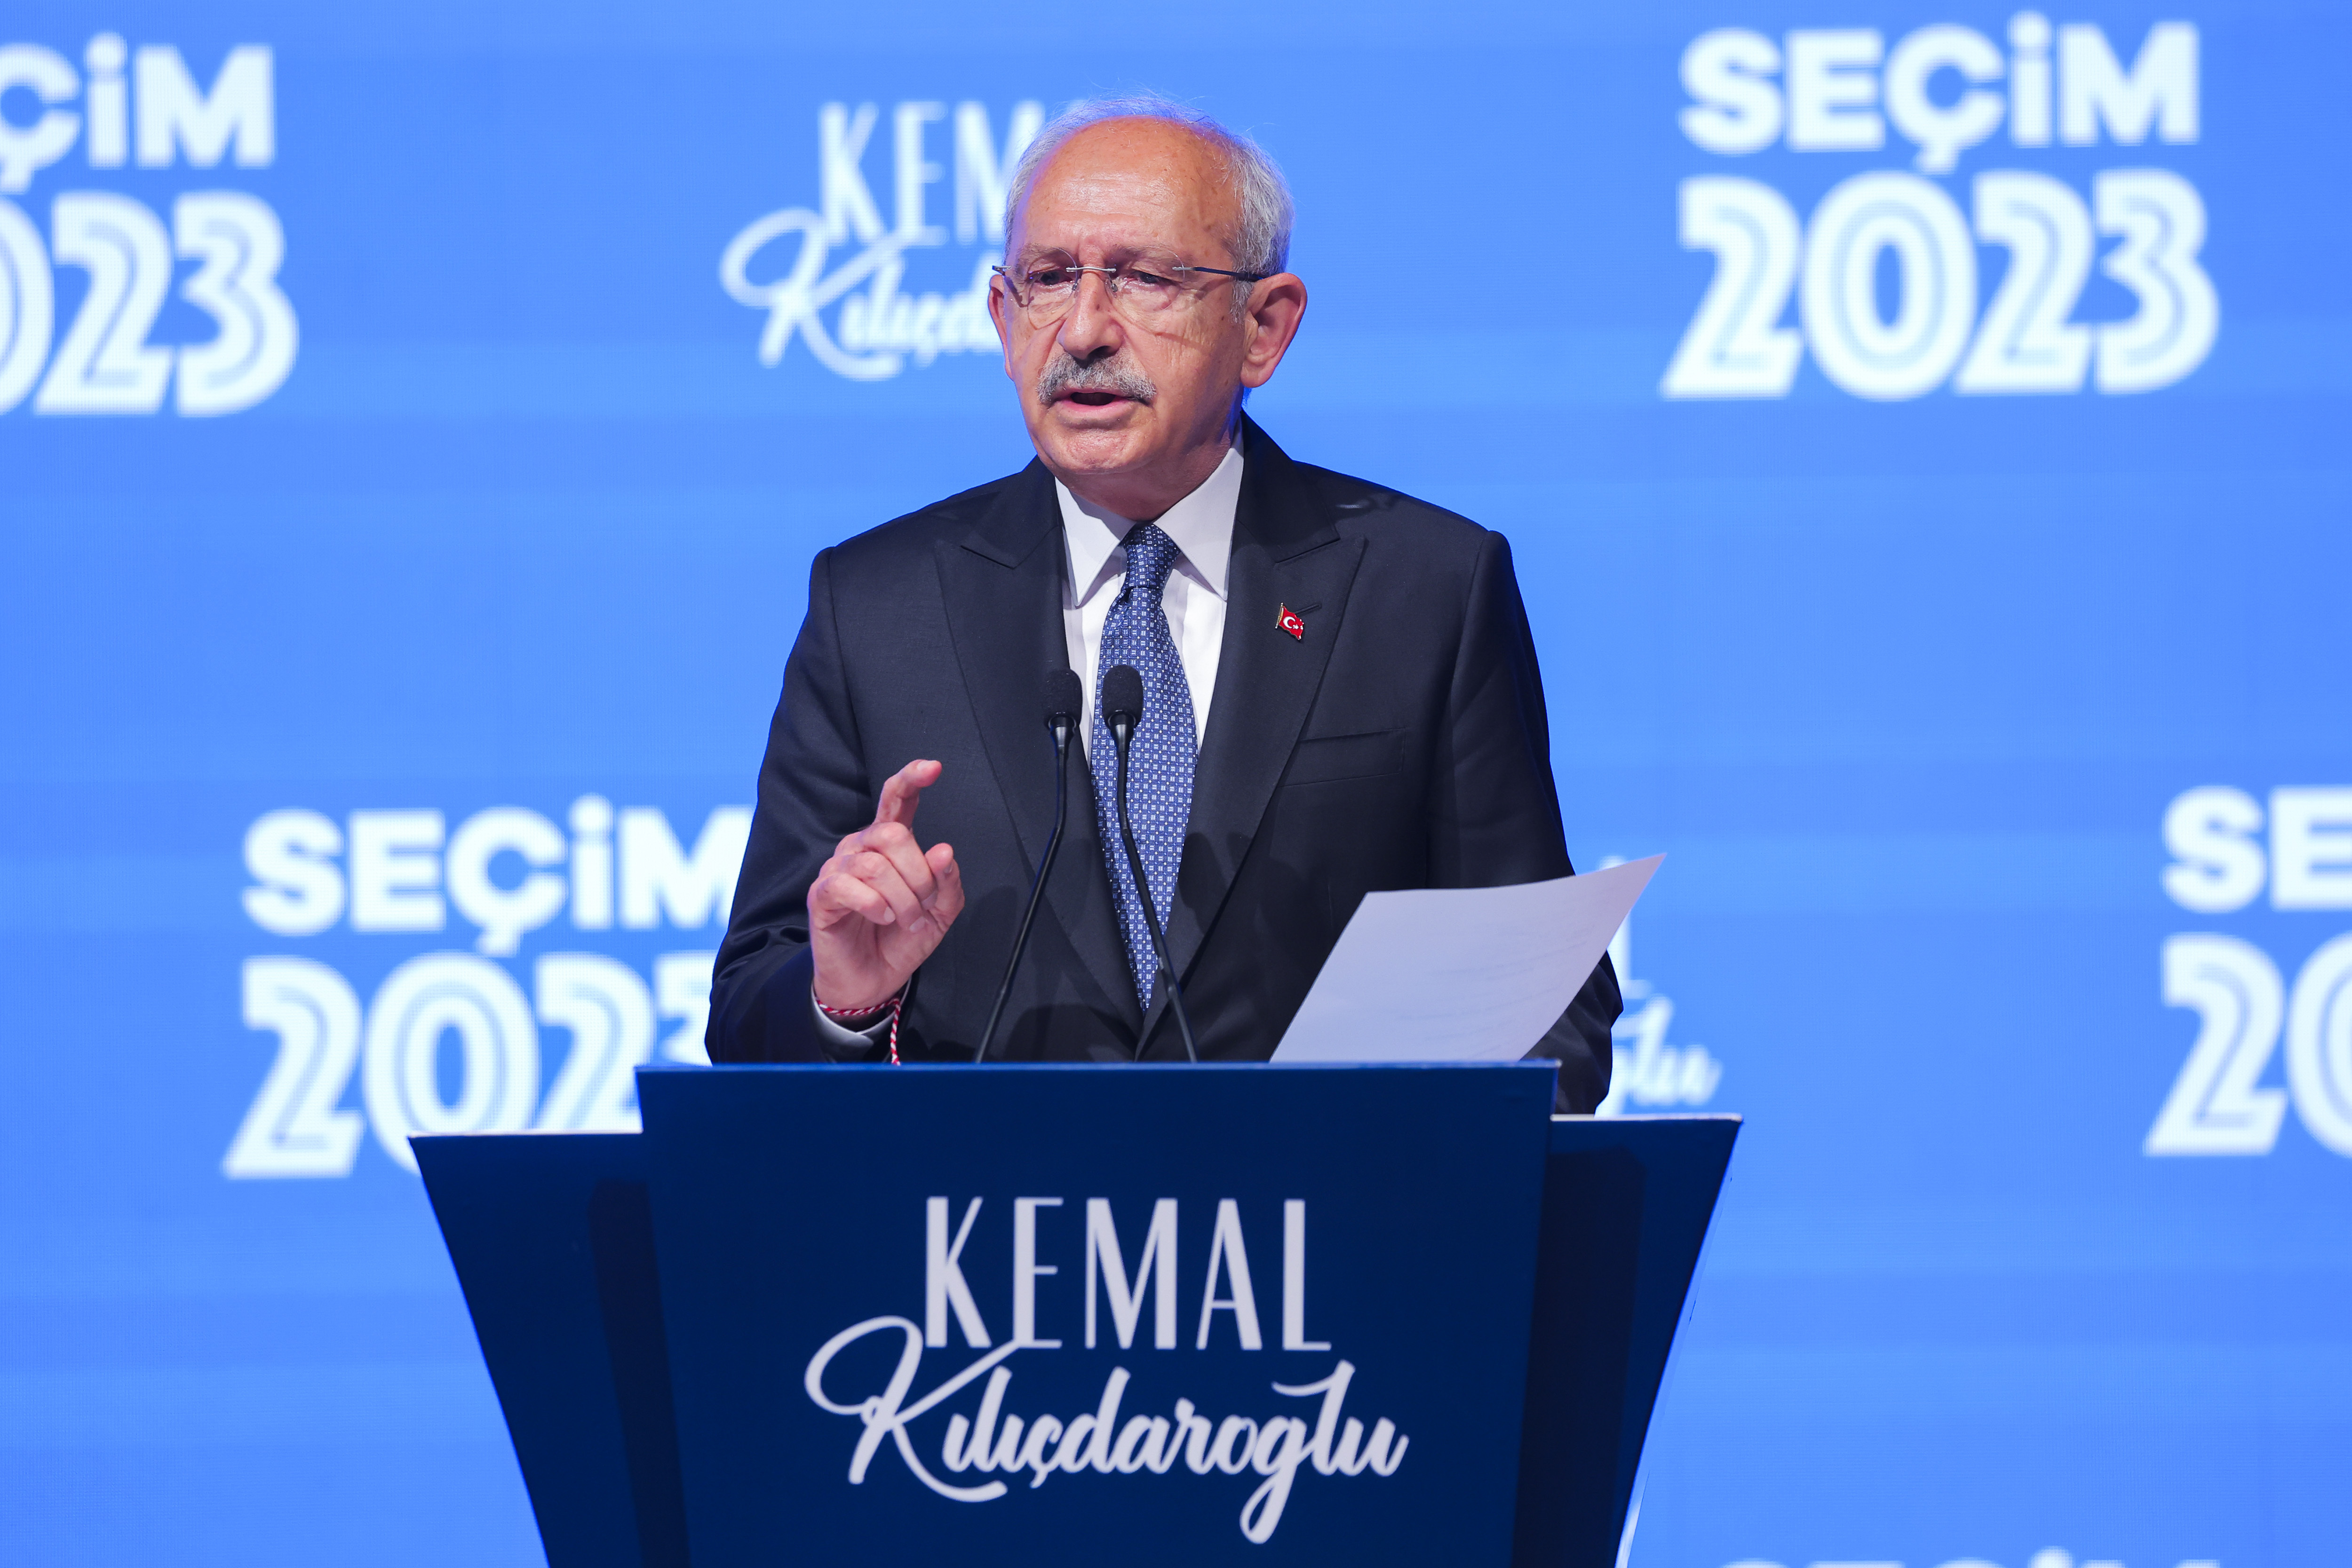 Kemal Kilicdaroglu, the 74-year-old leader of the center-left, pro-secular Republican People's Party (CHP) speaks at the party's headquarters in Ankara, Turkey, on Sunday, May 14, 2023. More than 64 million people, including 3.4 million overseas voters, were eligible to vote. (AP Photo)Associated Press/LaPresseOnly Italy and Spain